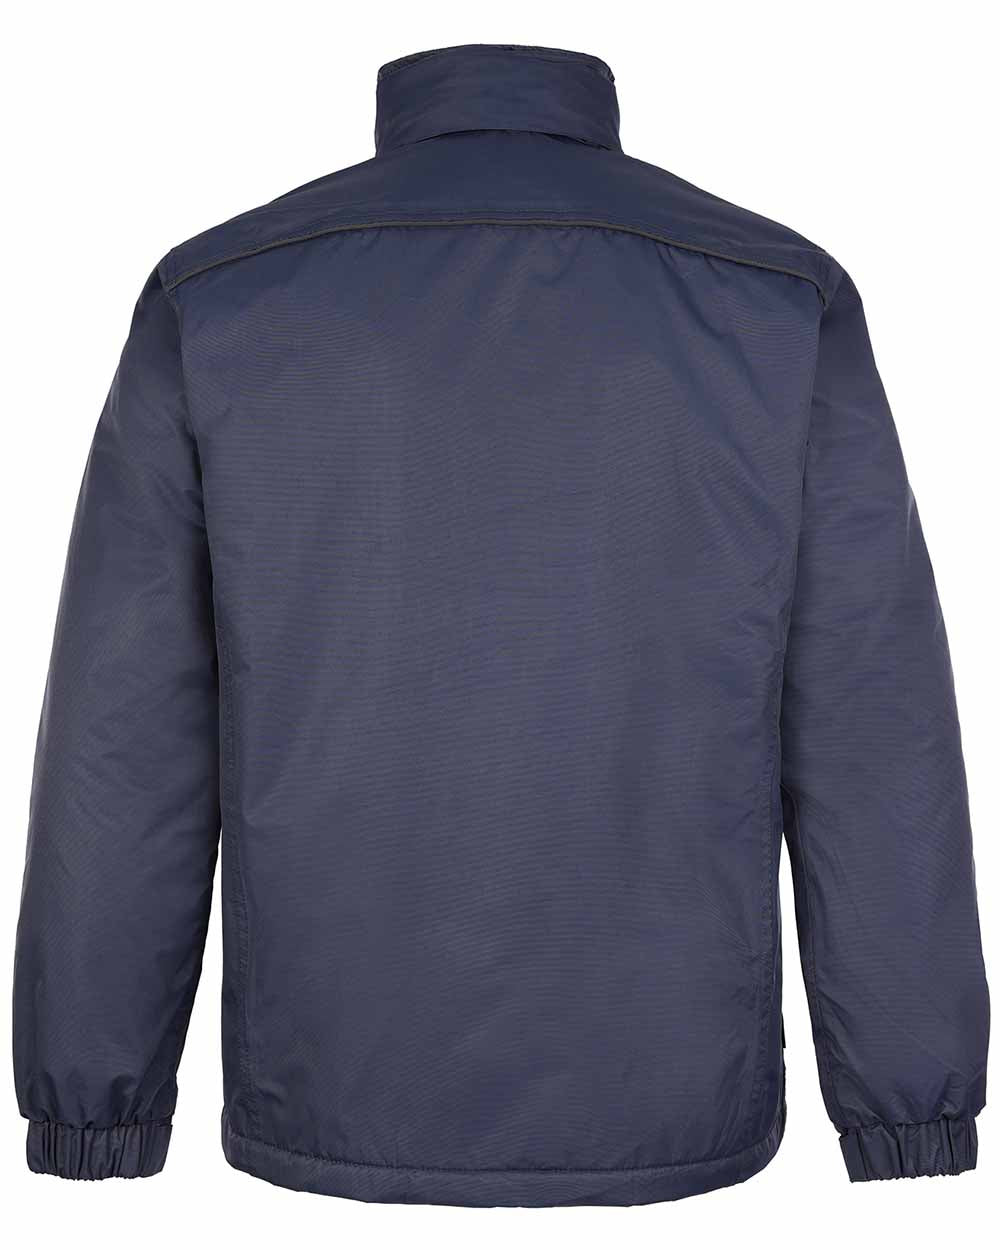 Navy Blue Coloured TuffStuff Newport Jacket On A White Background 